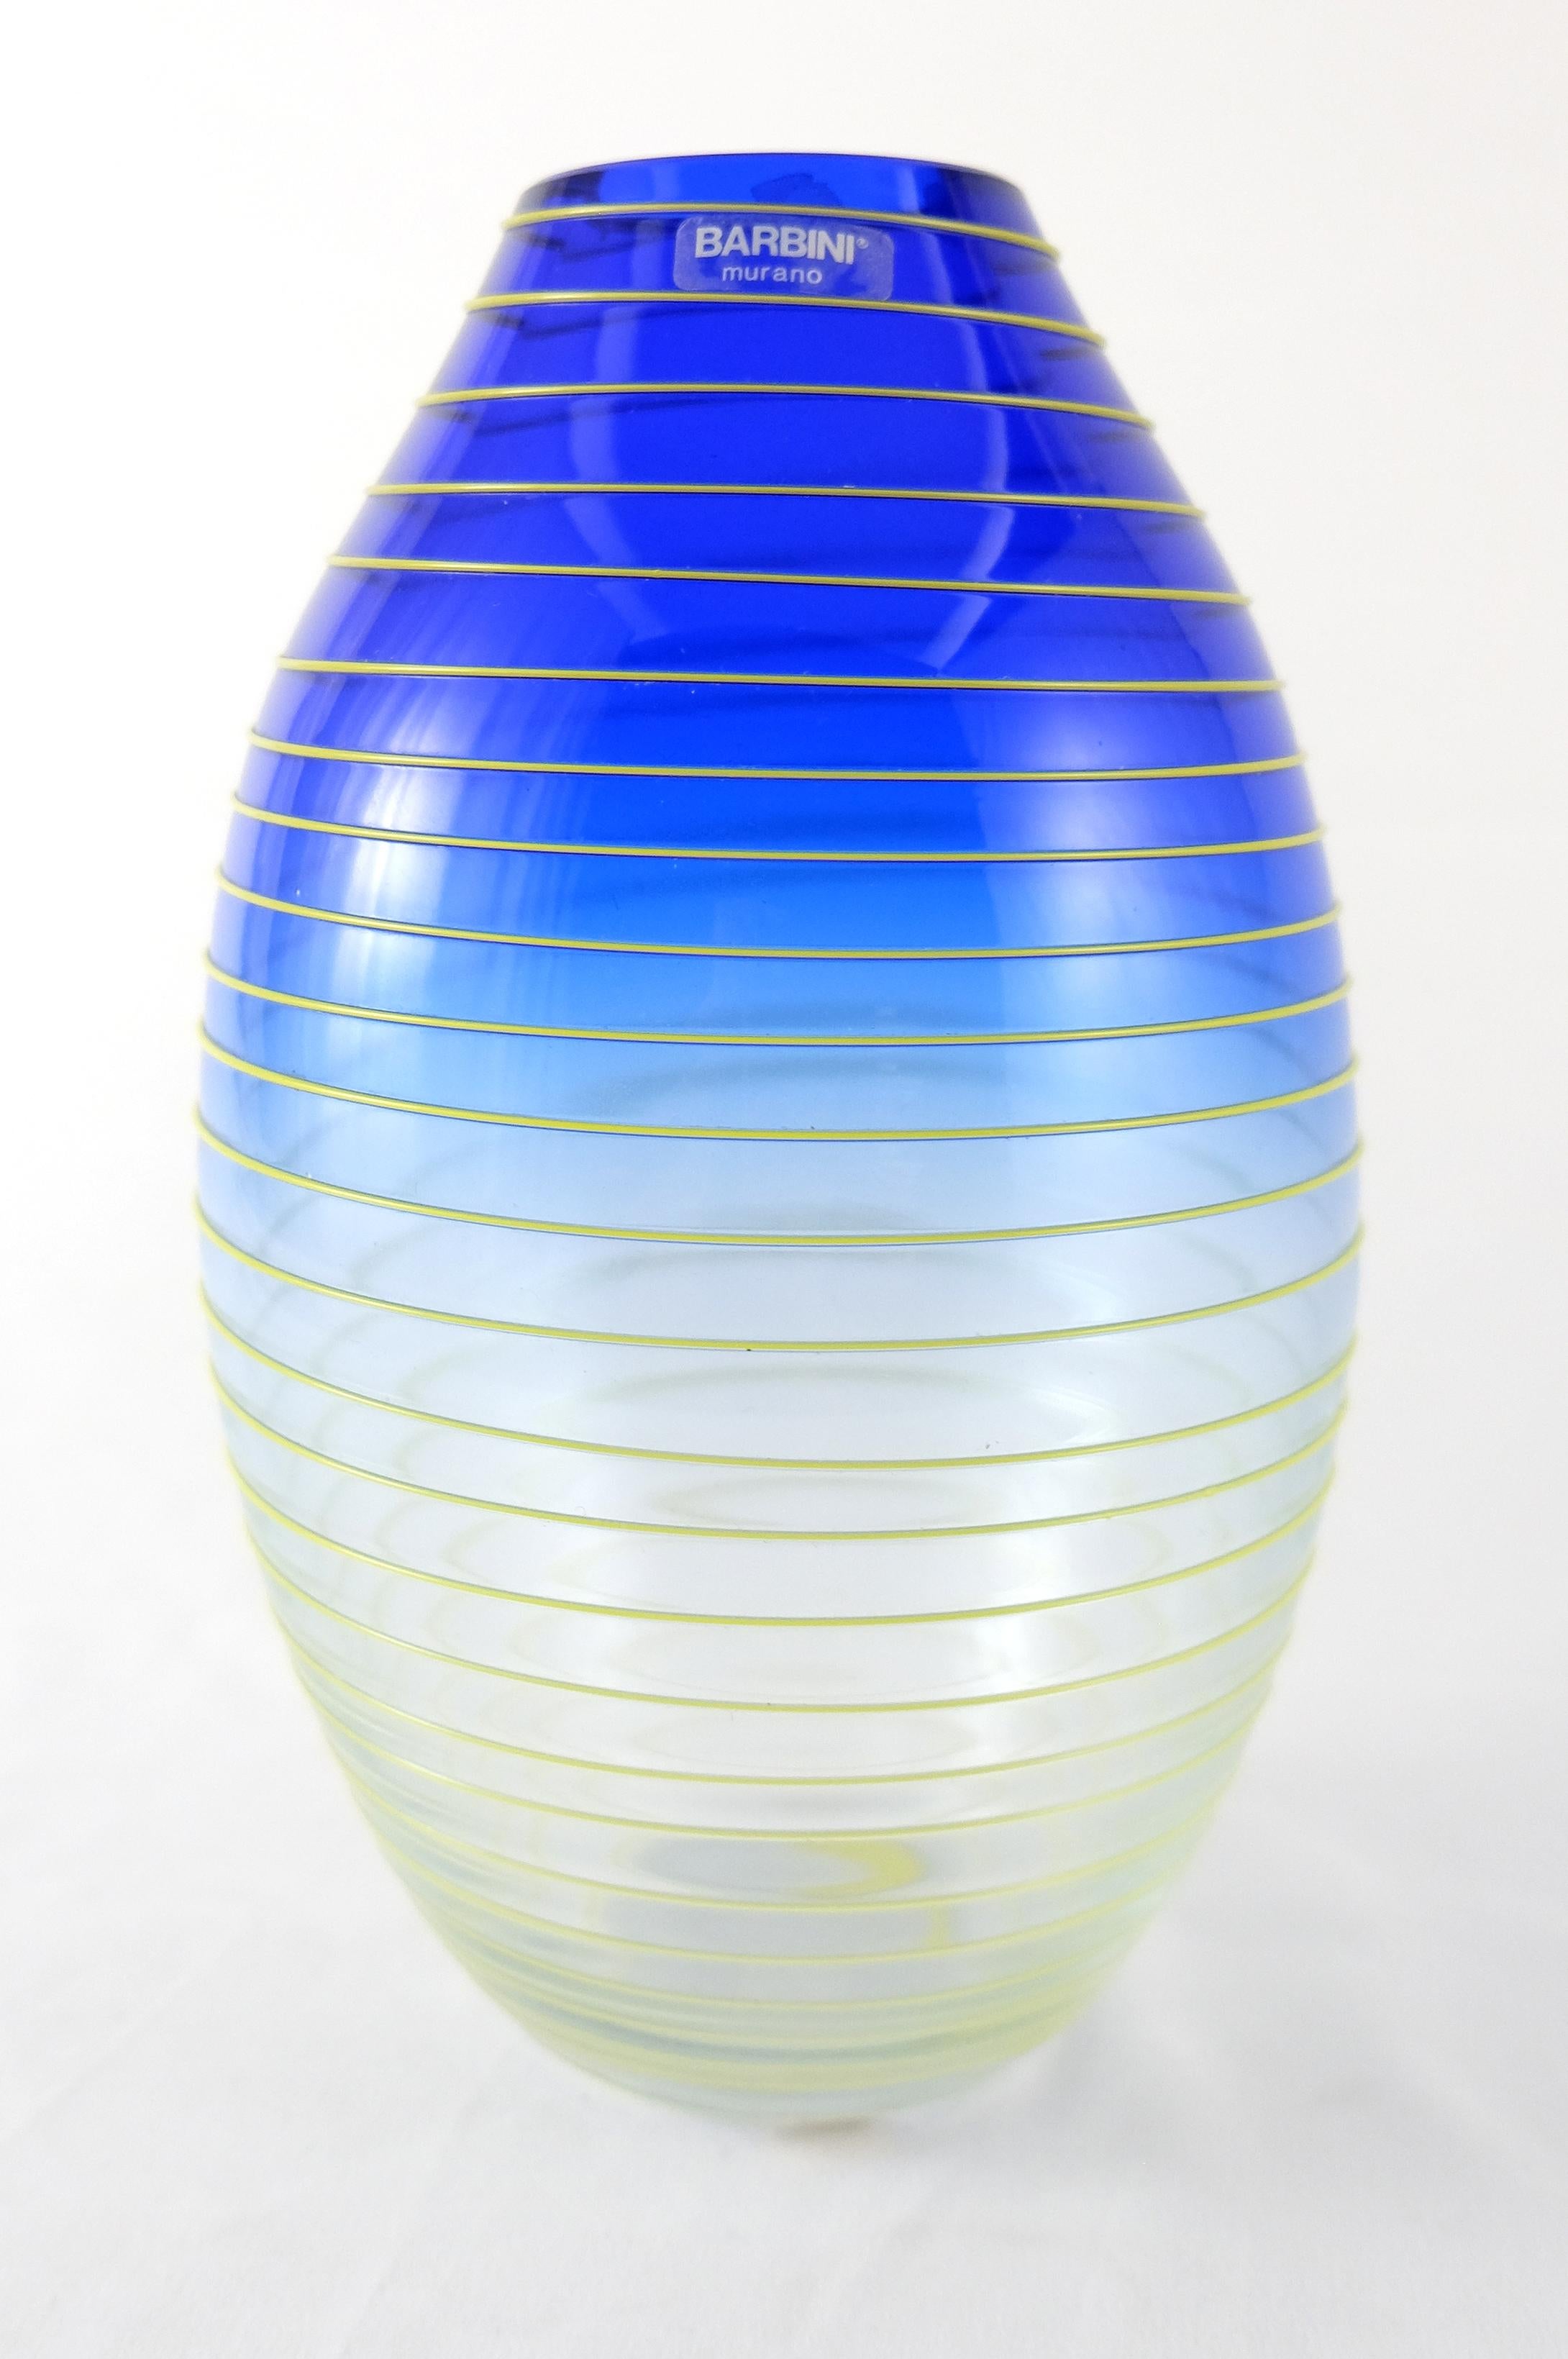 Barbini Murano Yellow and Blue Stripe Glass Vase Set

Offered for sale is a set of two yellow and blue stripe Murano glass vases. Each vase is signed on the base and still retains the original Barbini label. The measurements given below are for the